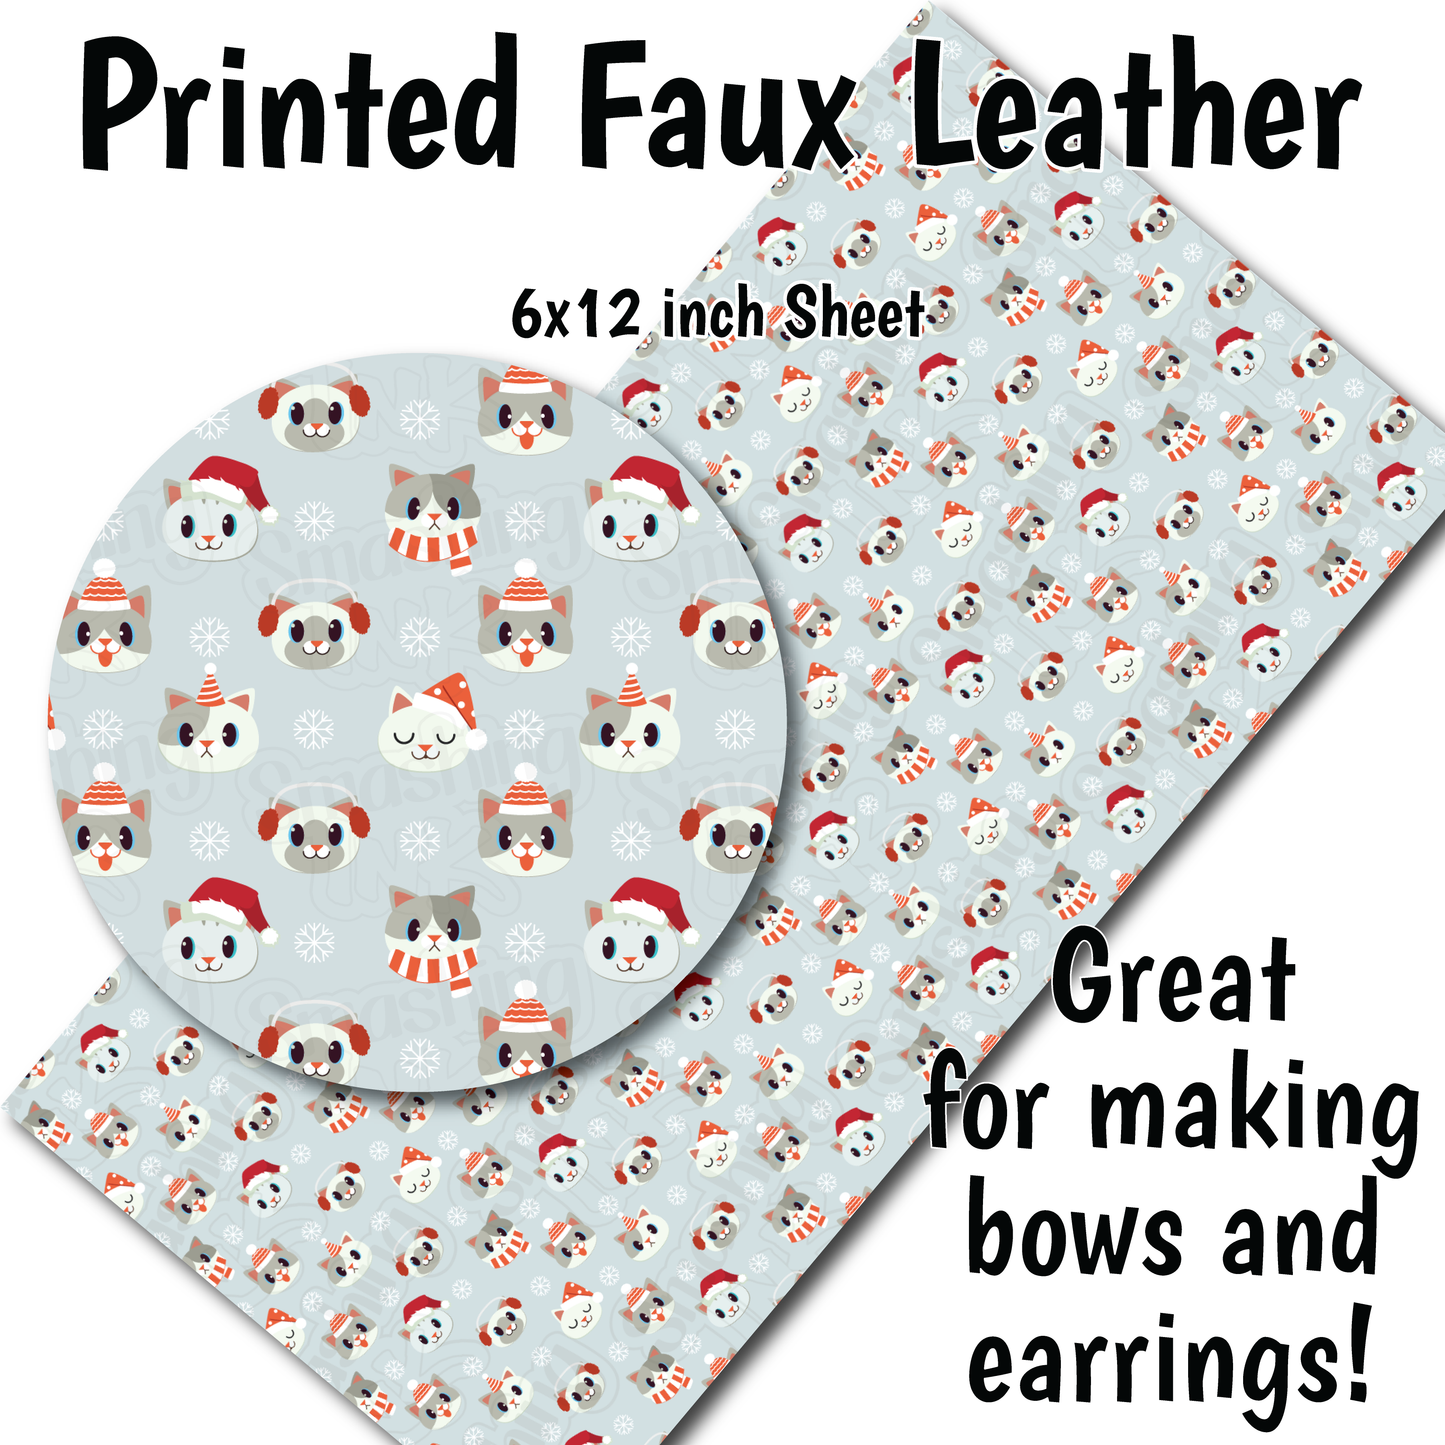 Meowy Christmas Q - Faux Leather Sheet (SHIPS IN 3 BUS DAYS)